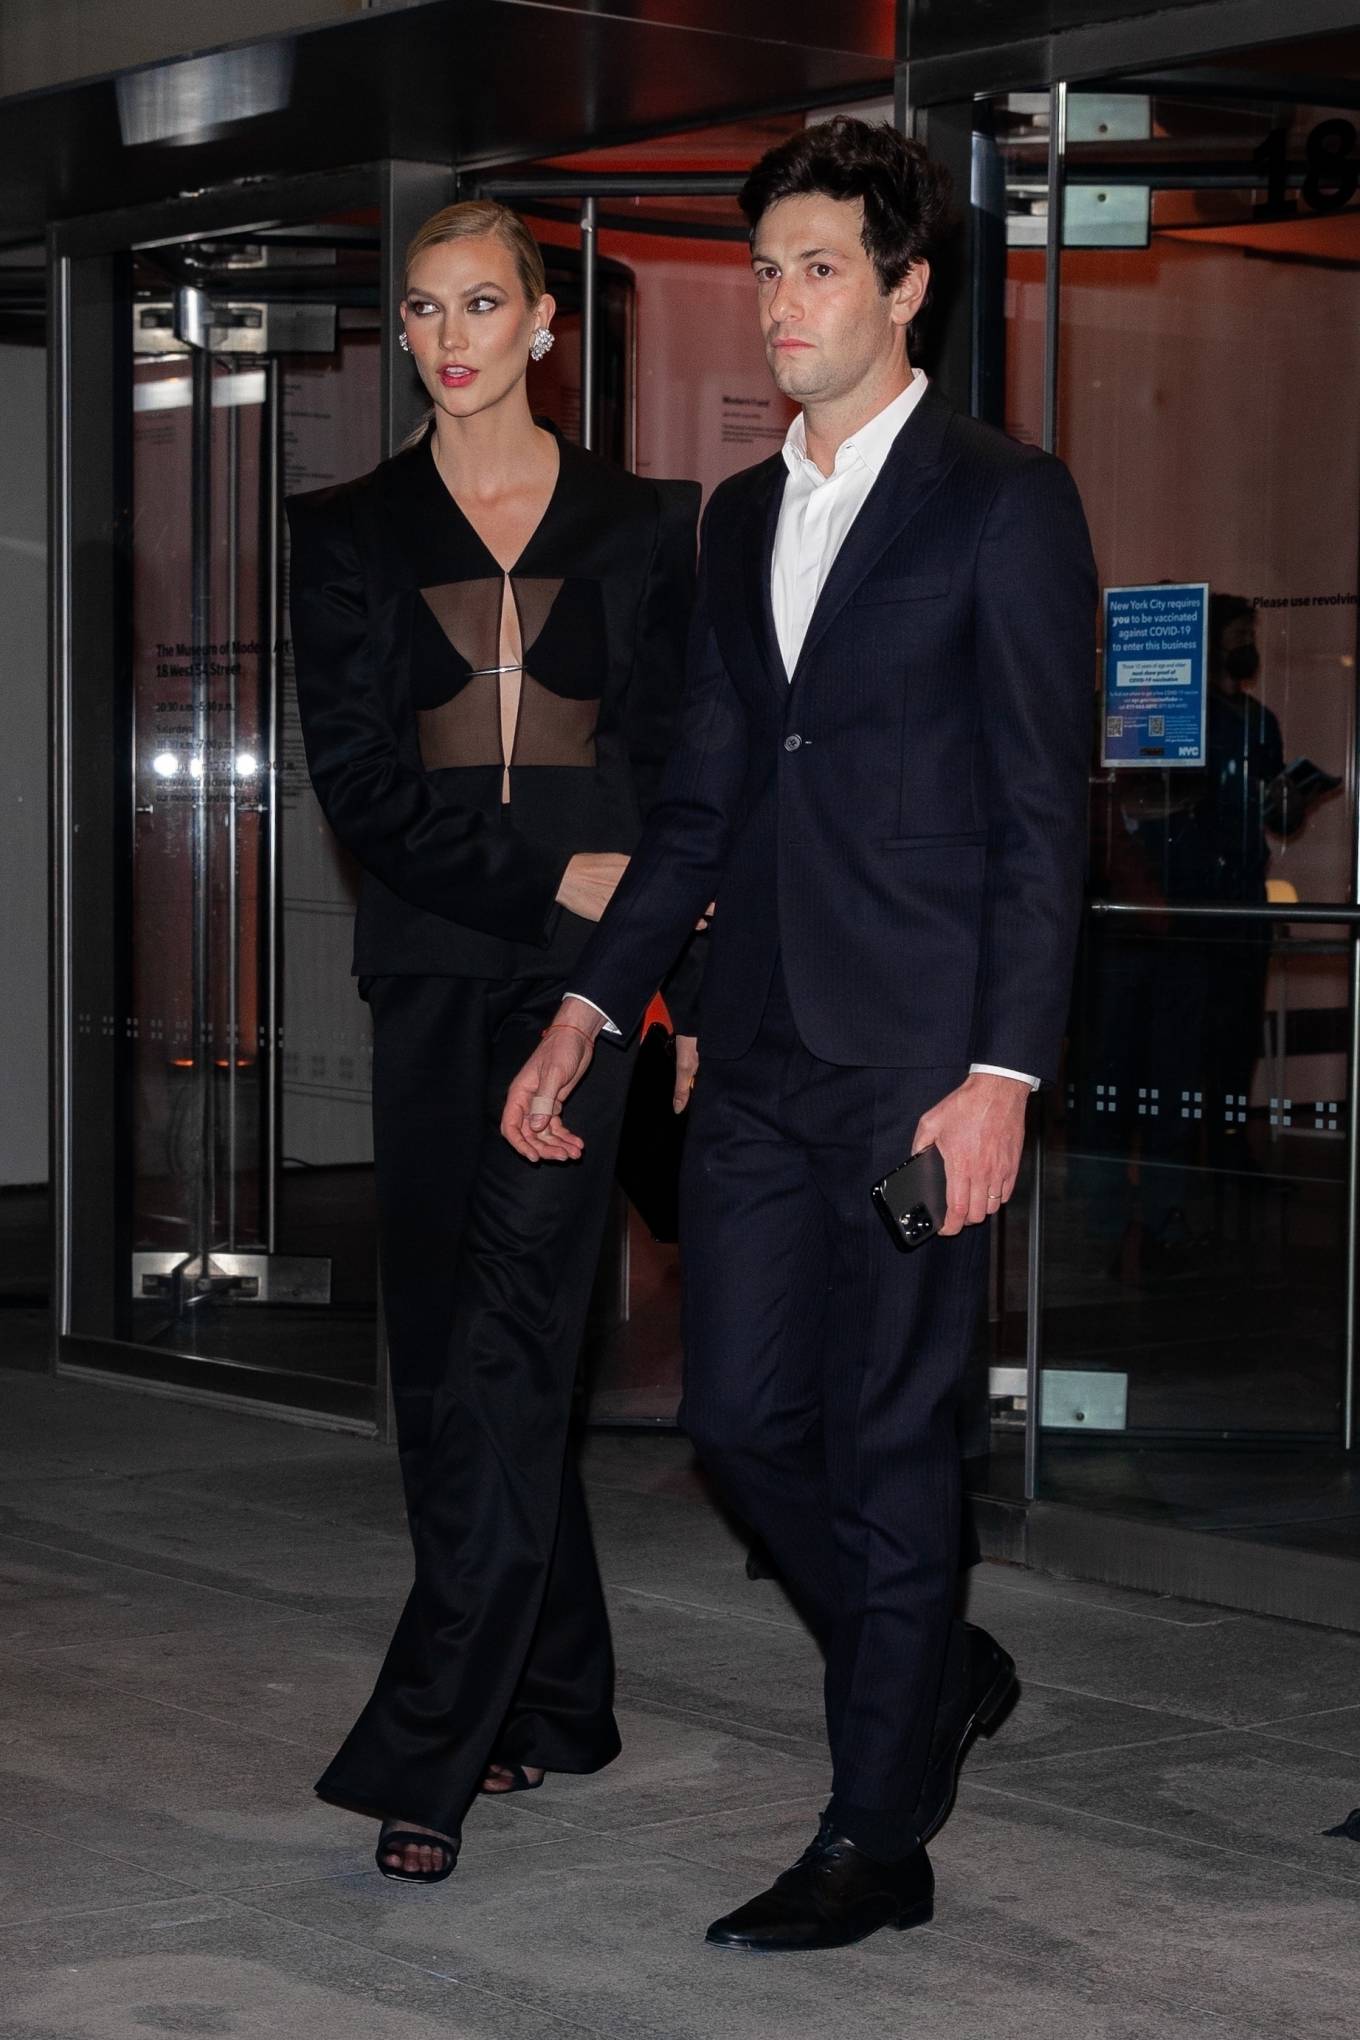 Karlie Kloss 2021 : Karlie Kloss – In a black resemble stepping out in New York City-14